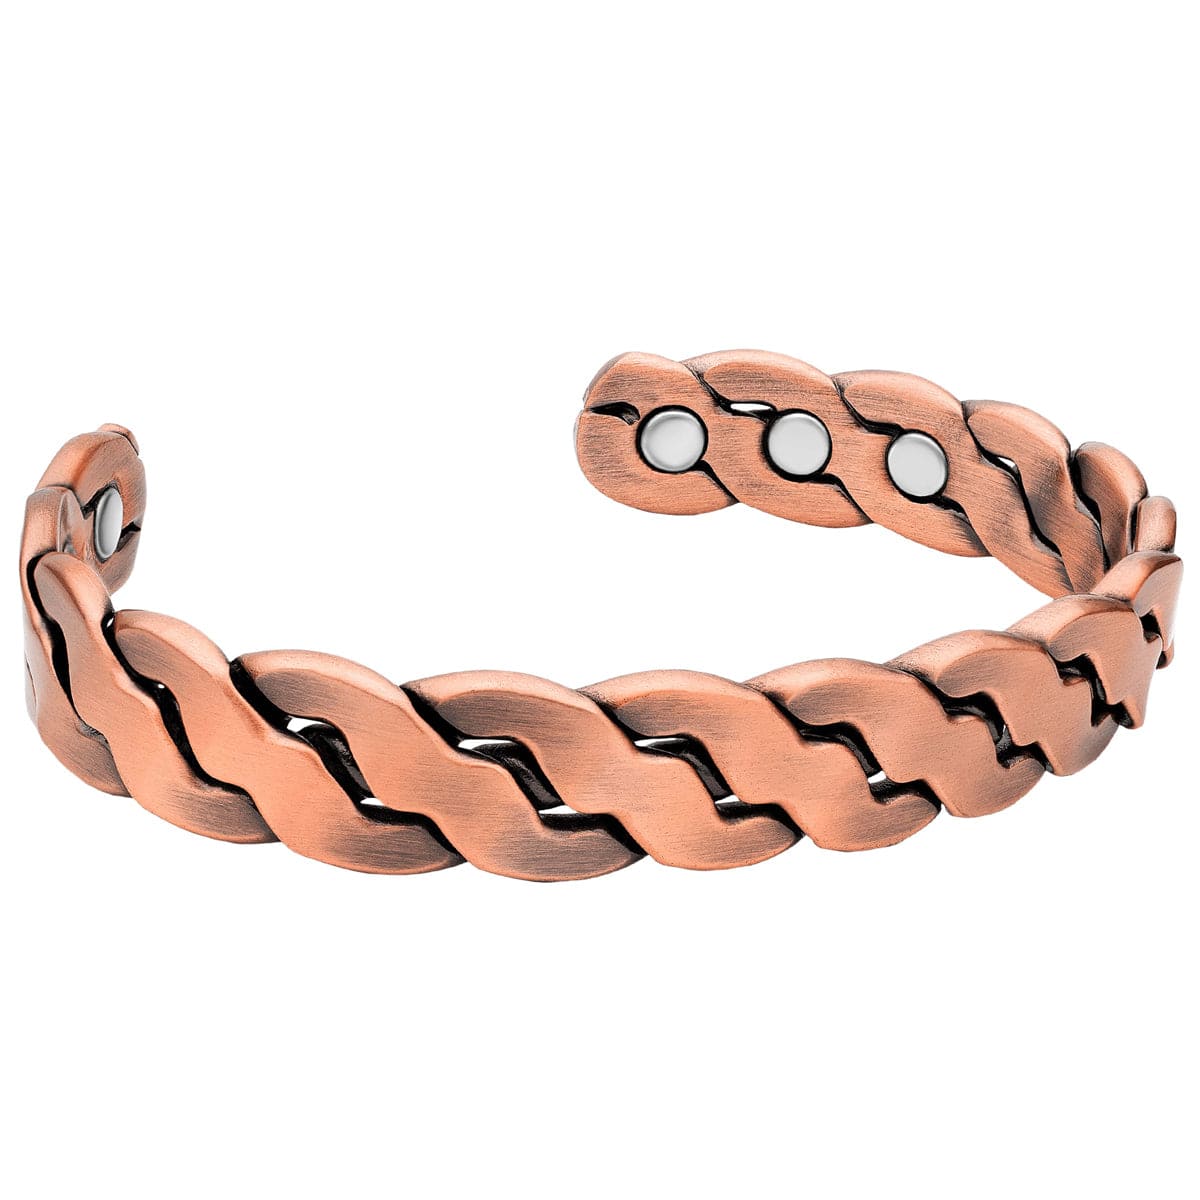 Rugged Twist Copper Magnetic Therapy Bracelet Bangle